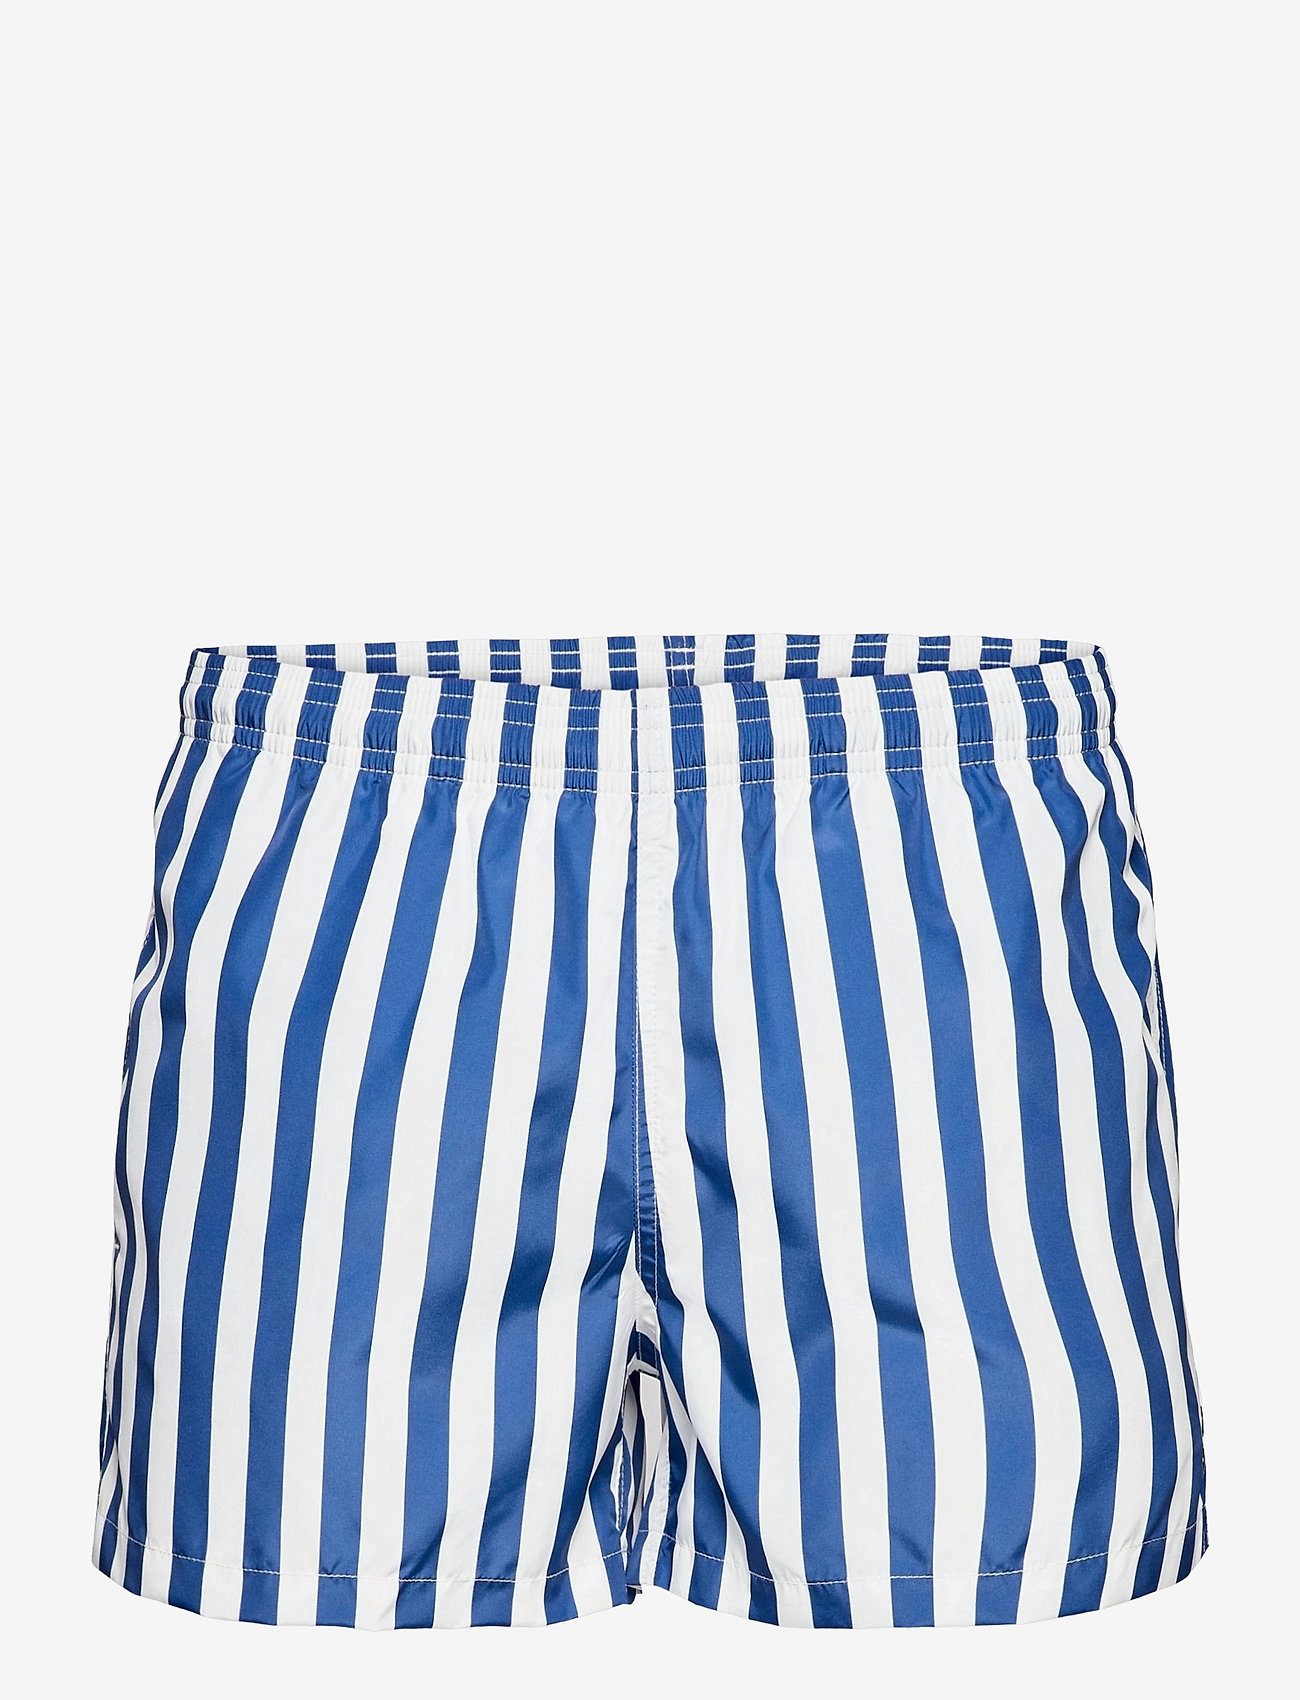 vertical striped shorts